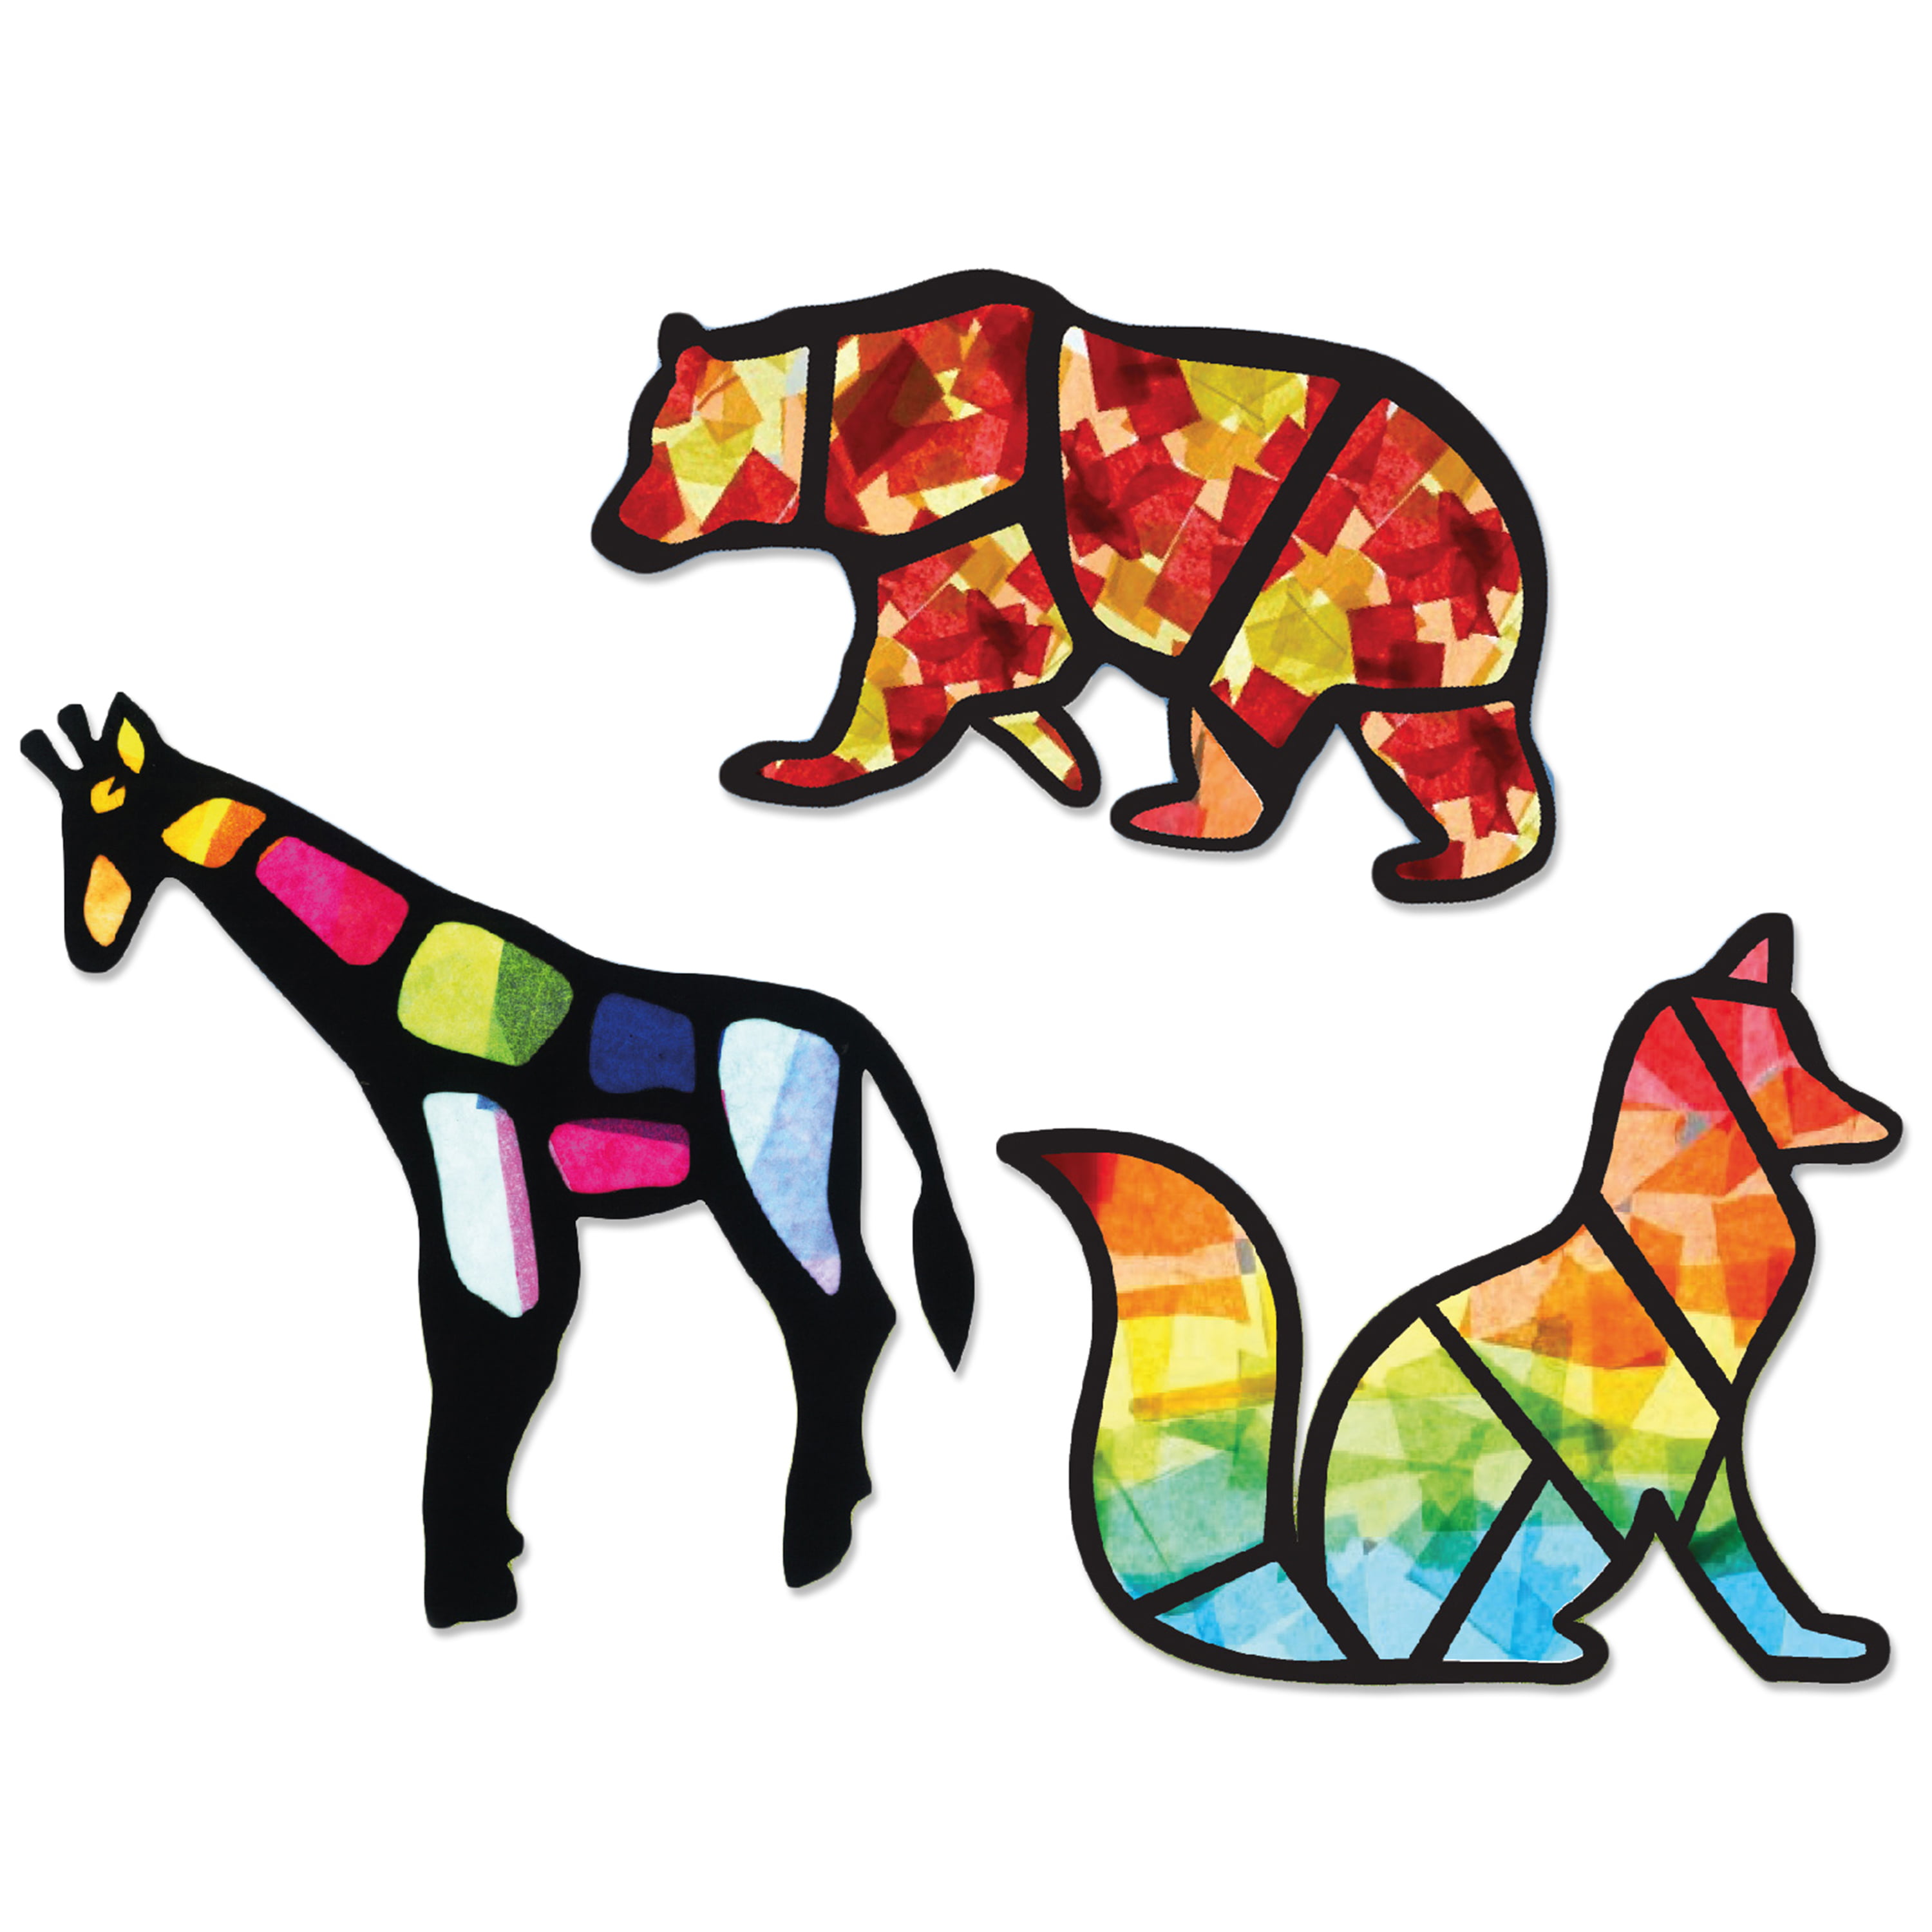 Faux Stained Glass Animals Kit — CraftLab Seattle